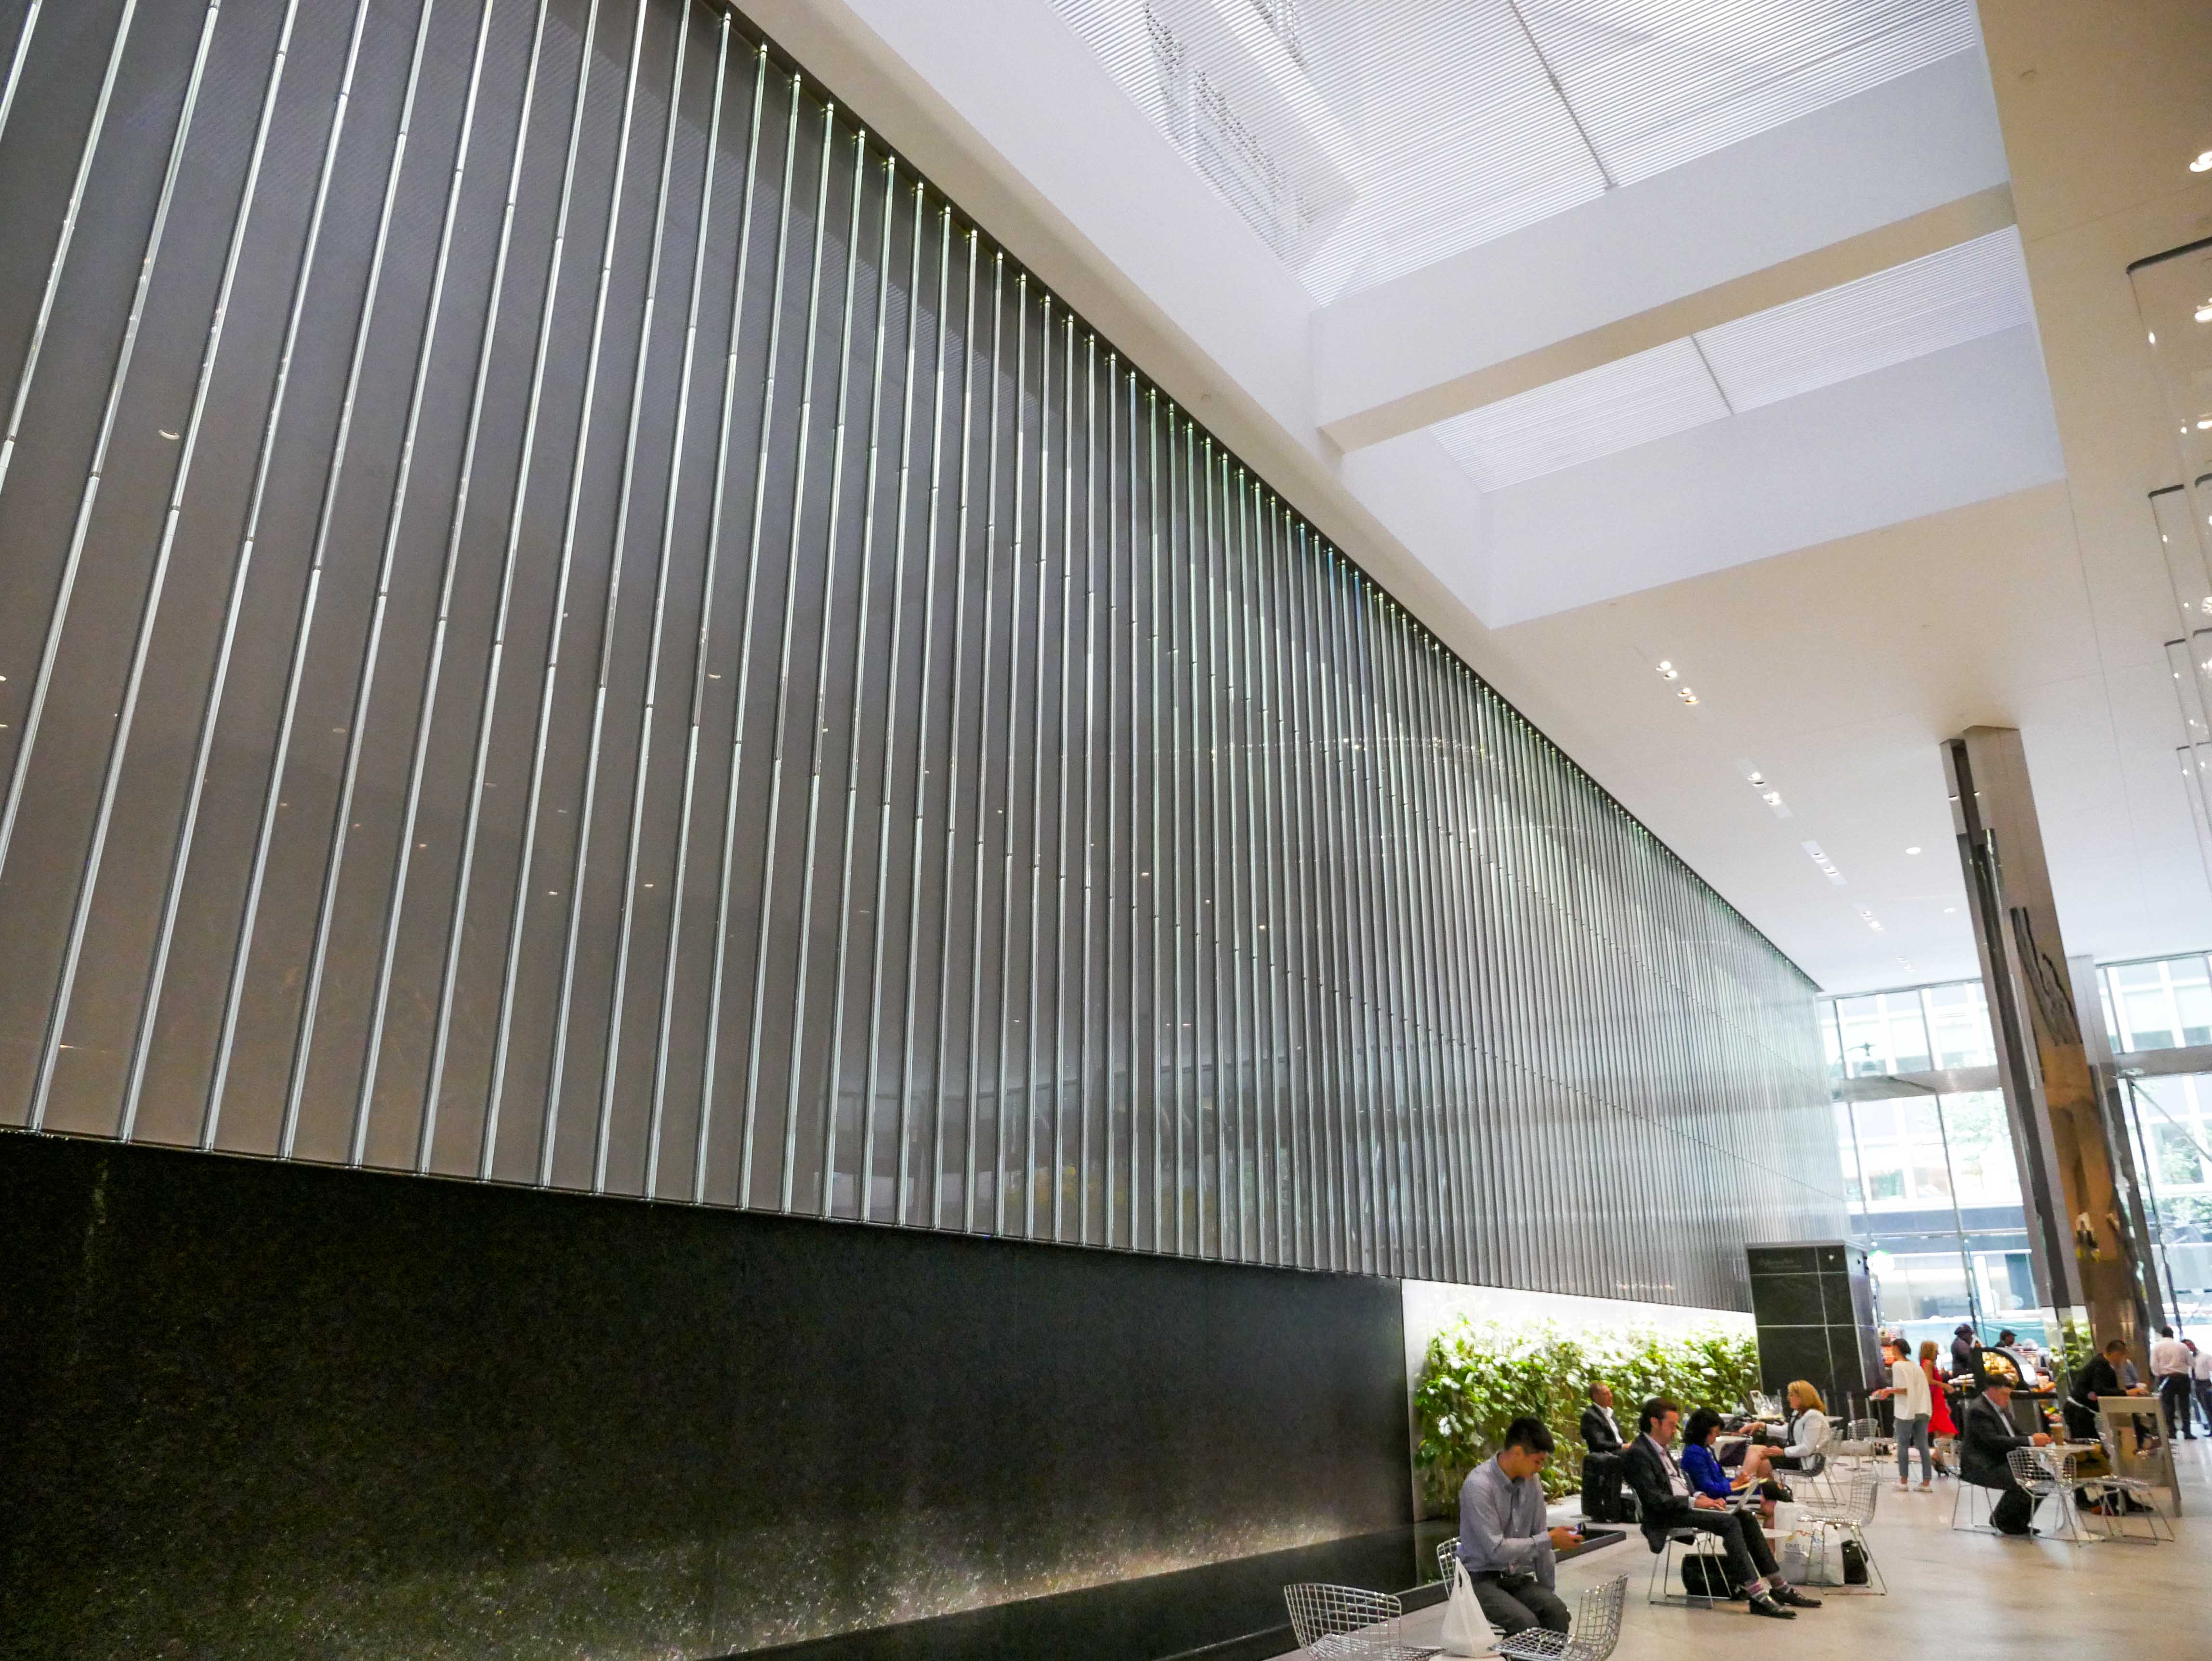 Inside BlackRock's office tower, AGNORA's Park Ave Atrium features big glass with oversize laminate panels with low iron, back painted metallic ceramic frit, with people sitting in the background at the Starbucks cafe.